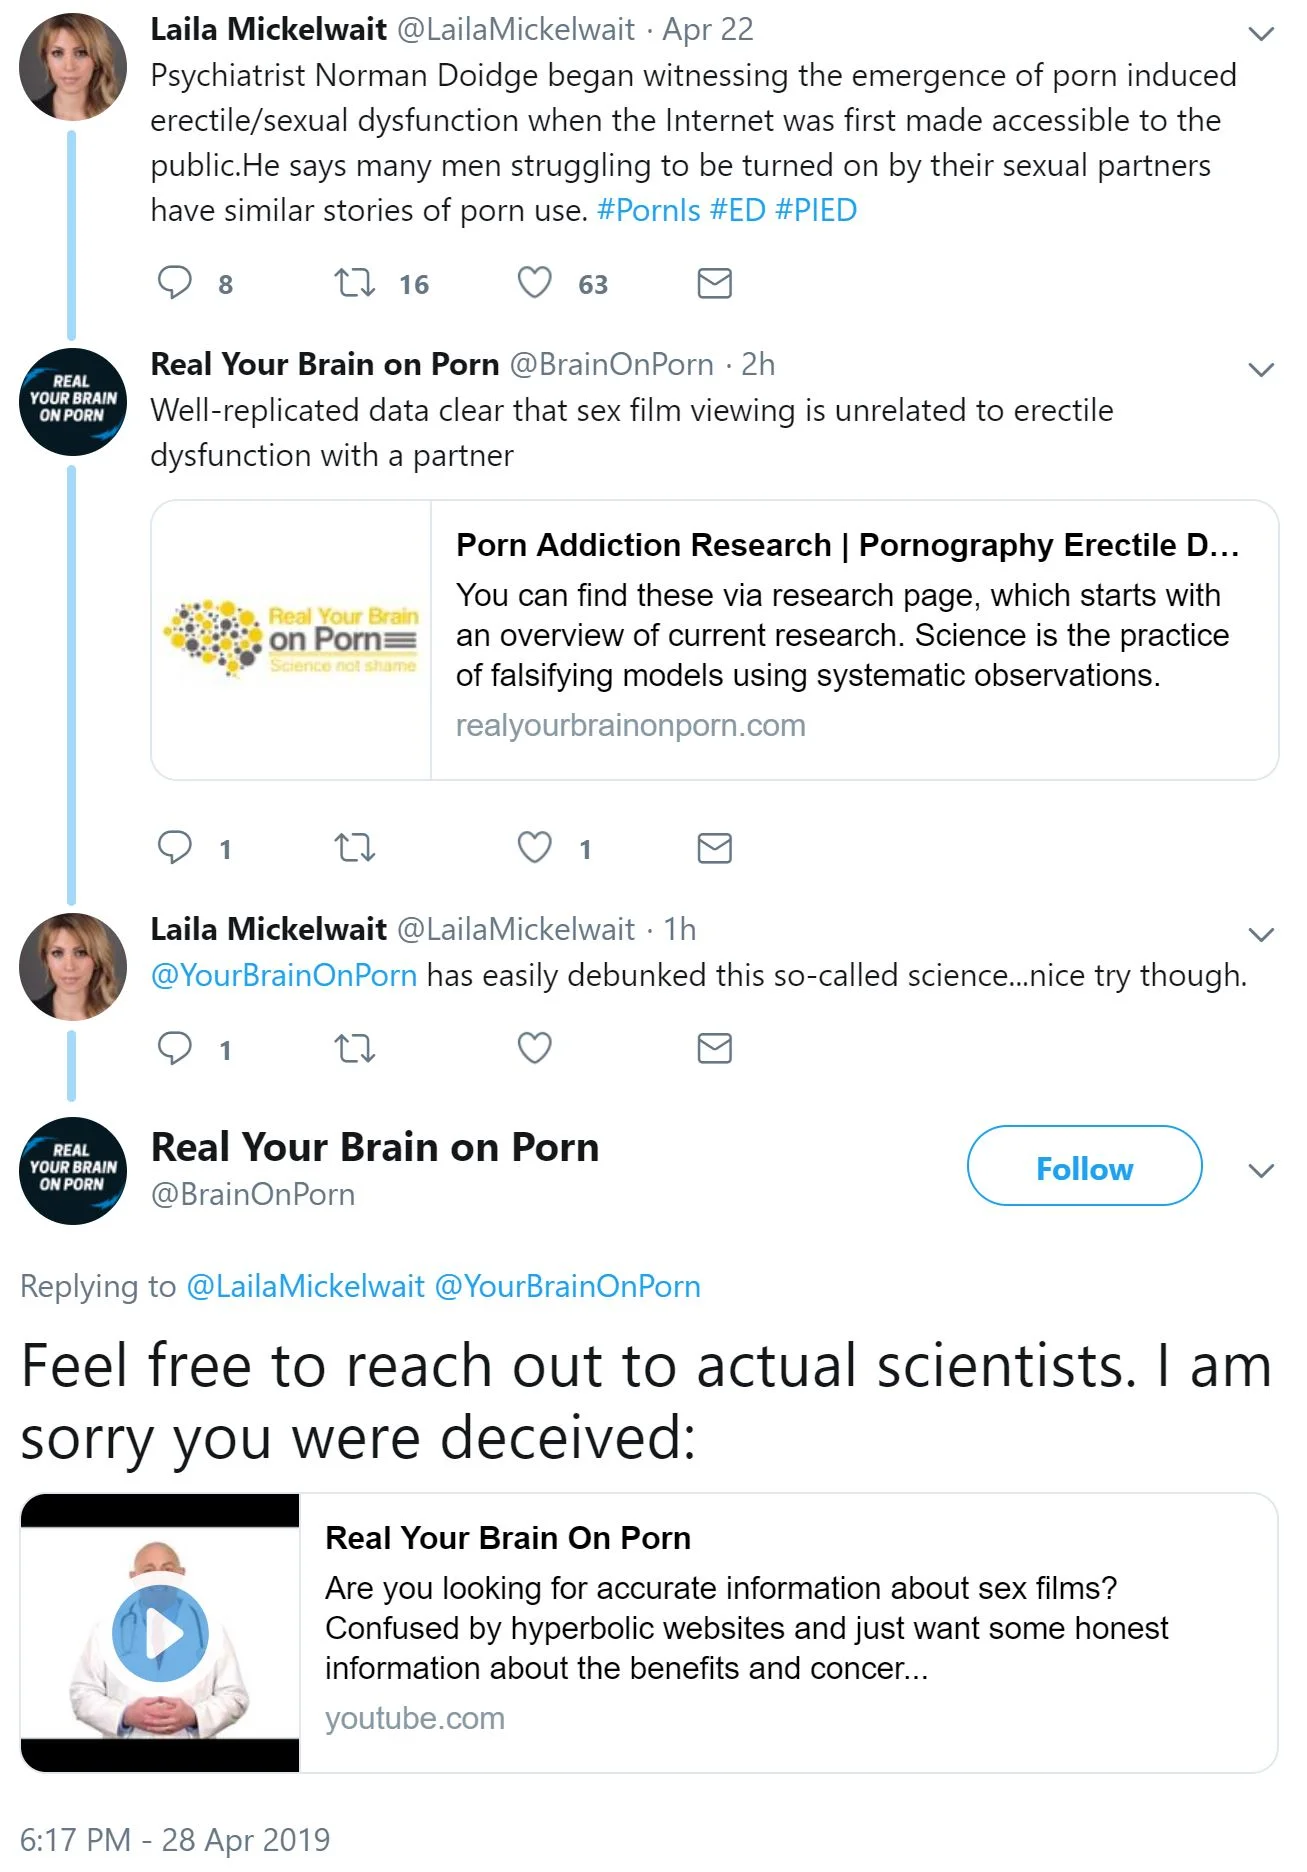 RealYourBrainOnPorn (@BrainOnPorn) tweets Daniel Burgess, Nicole Prause and pro-porn allies collaborate on a biased website and social media accounts to support the porn industry agenda (beginning in April, 2019)